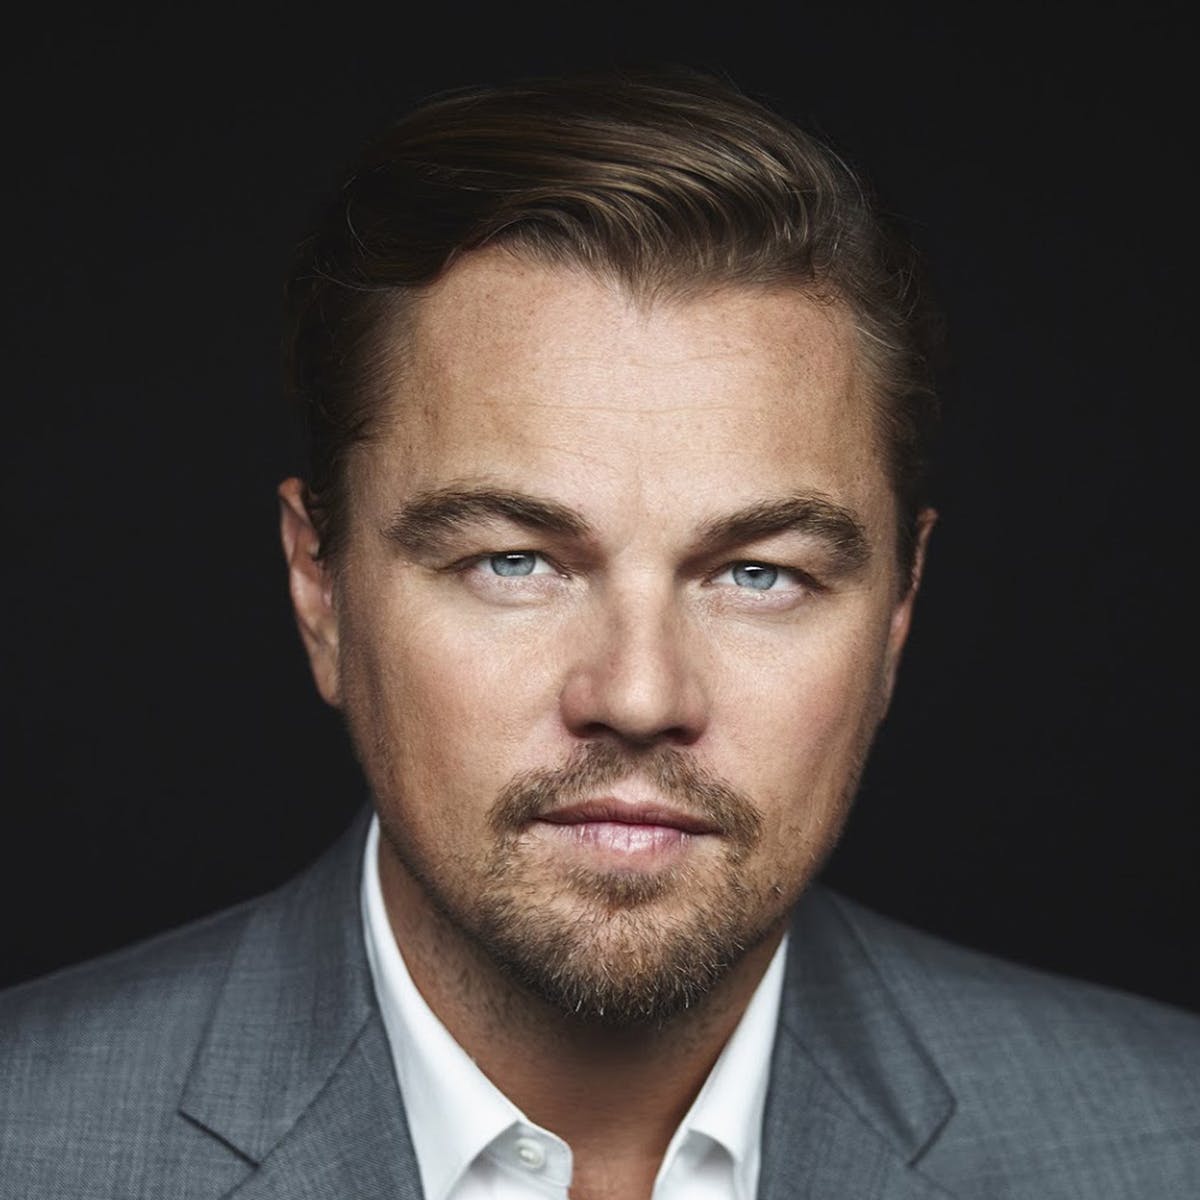 Leonardo DiCaprio Net Worth 2019 - Famous Actor - Foreign policy1200 x 1200